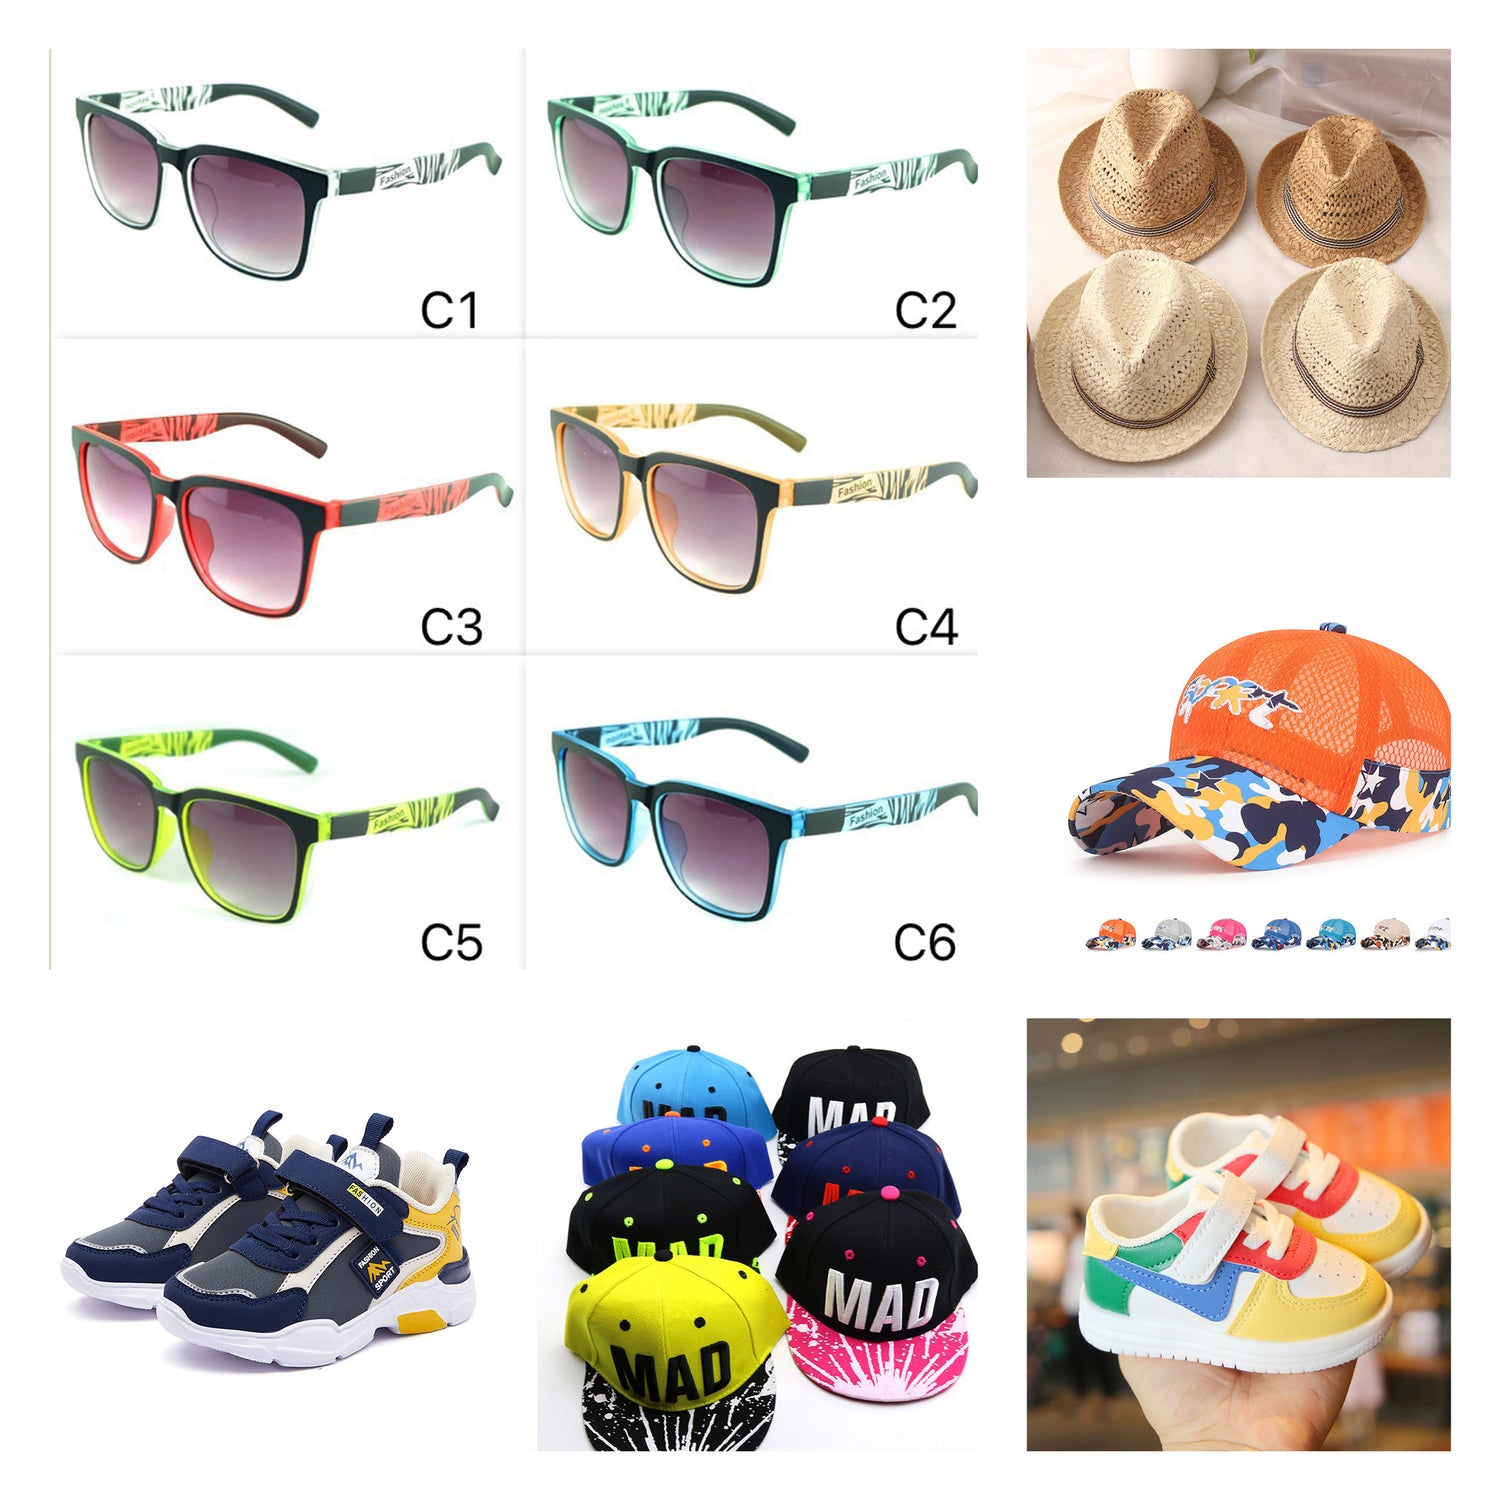 Boy Hats, Glasses, Shoes, and More: Newborn, Toddler, and Older